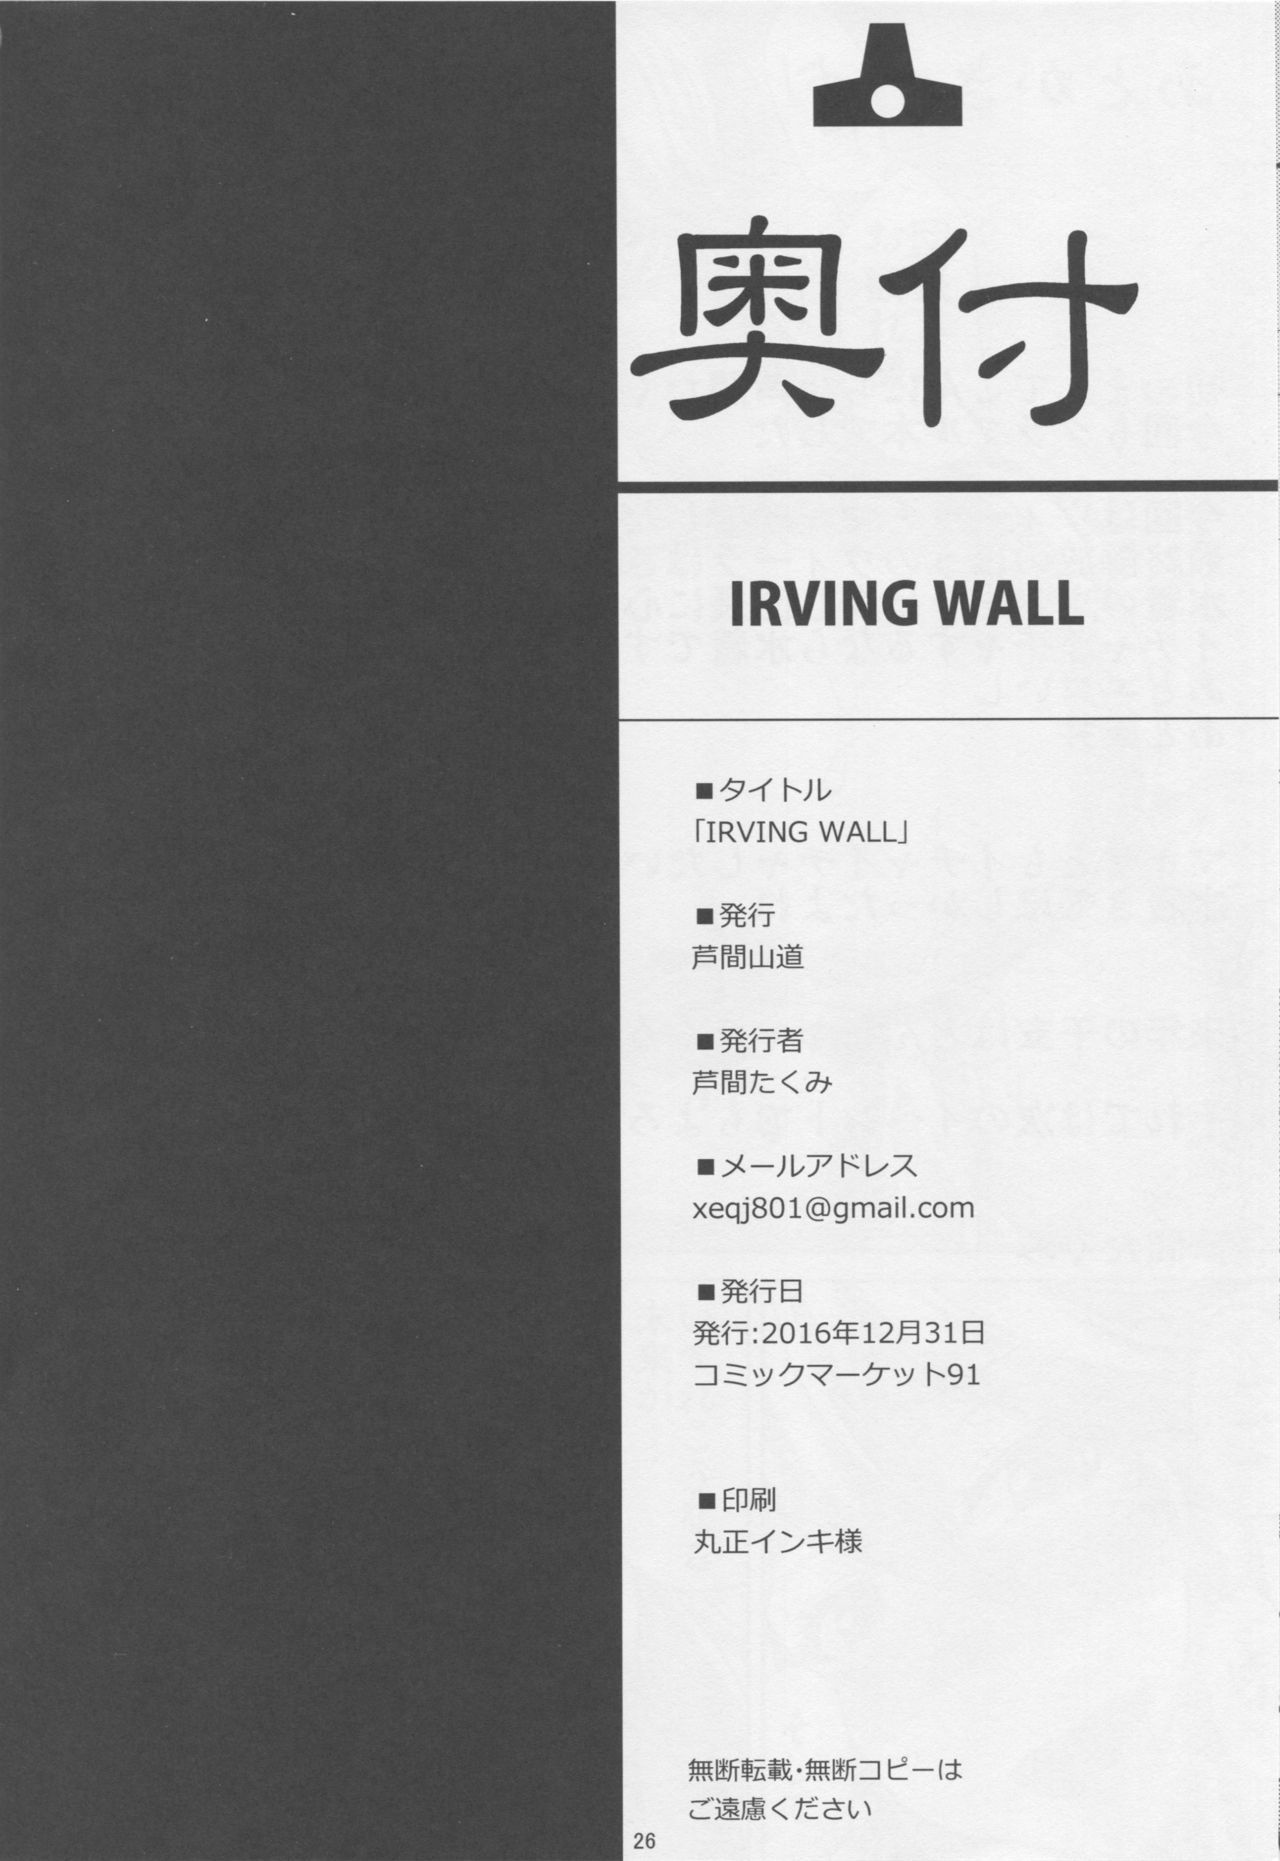 IRVING WALL